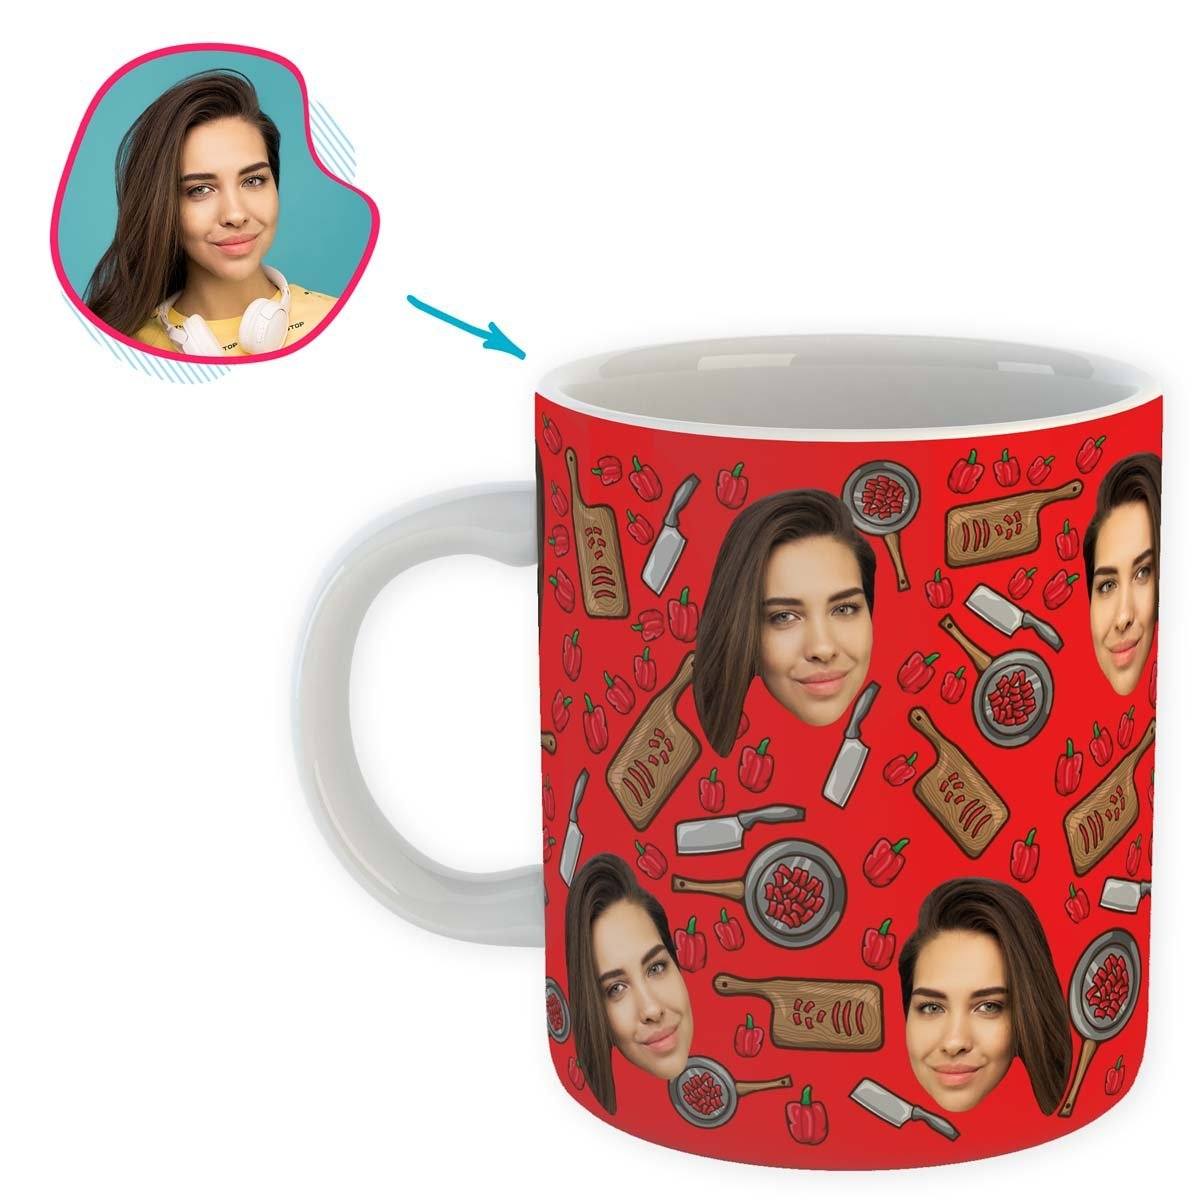 red Сooking mug personalized with photo of face printed on it